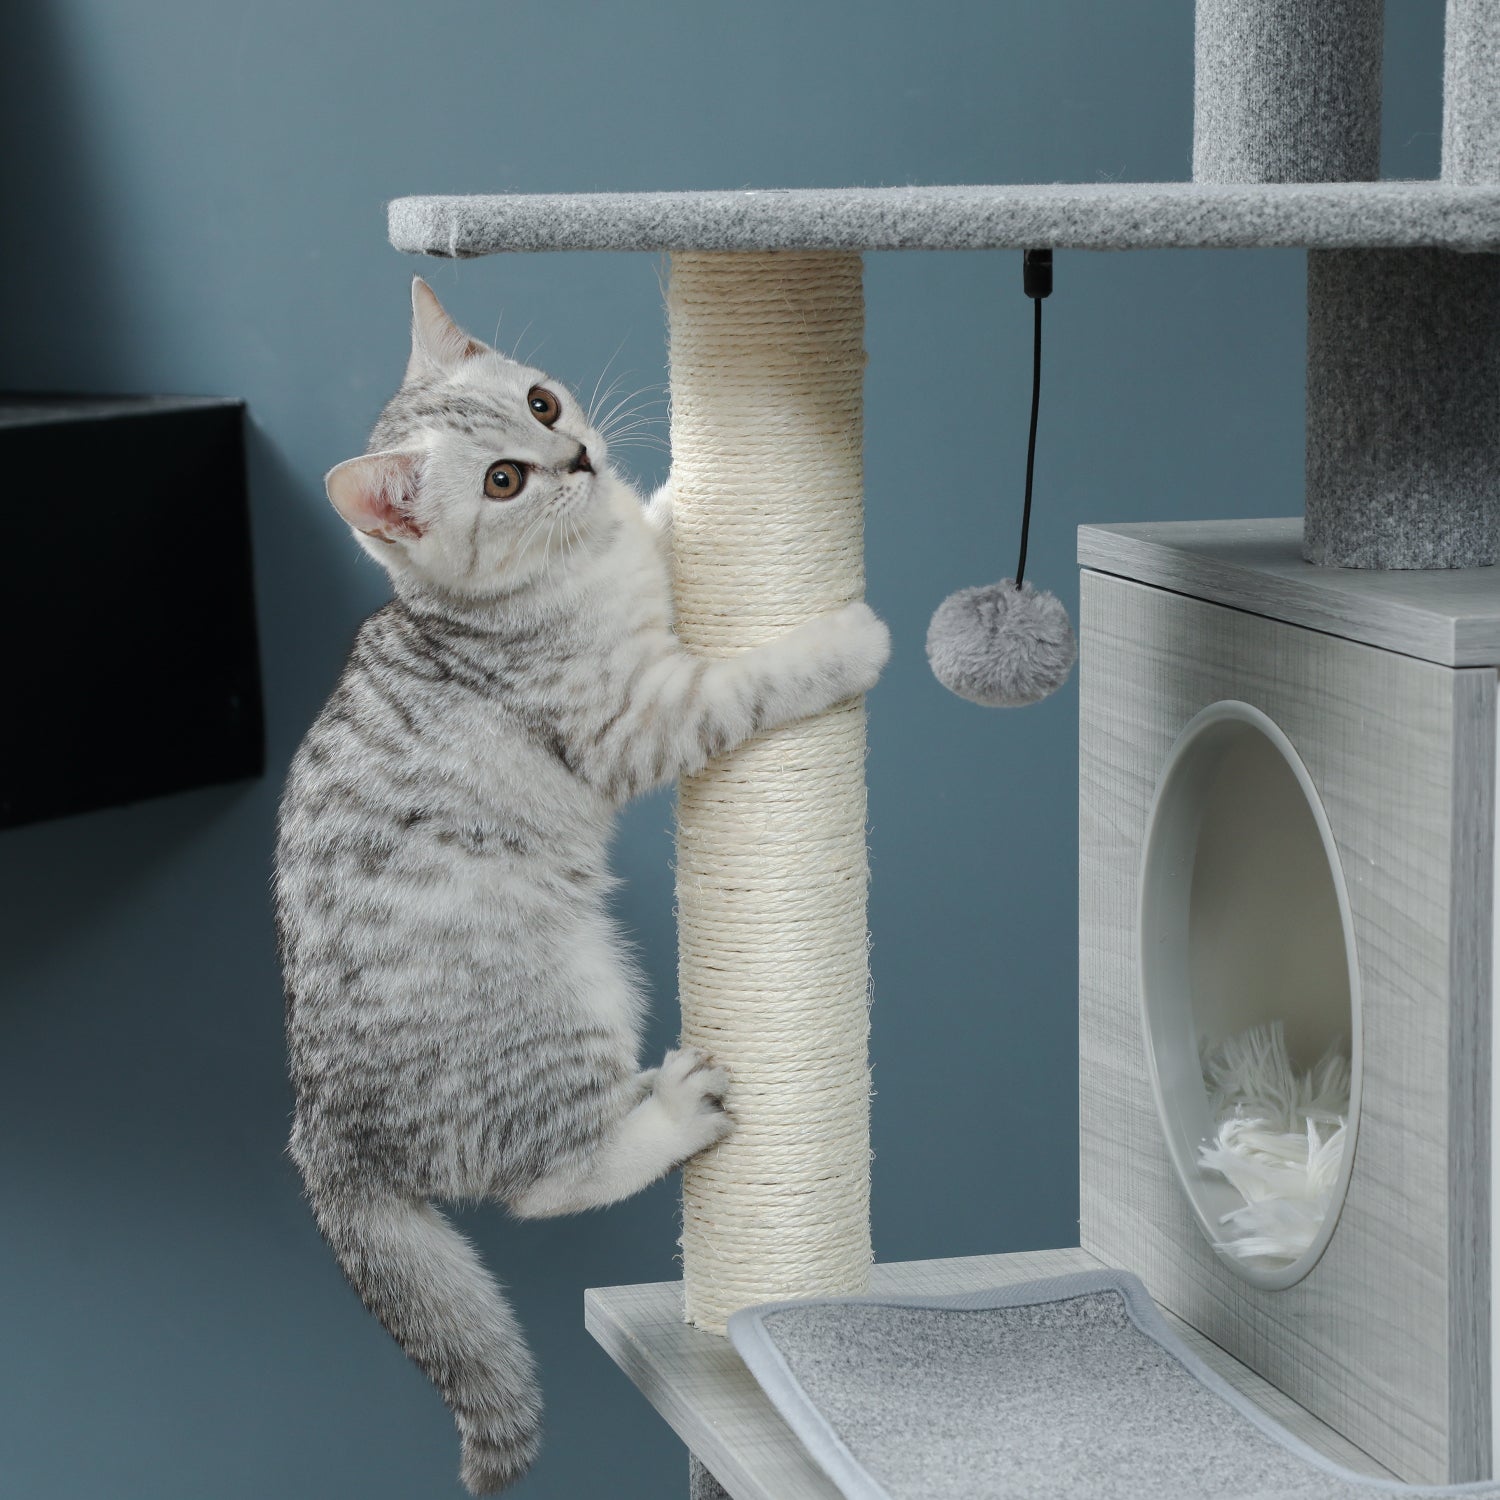 Rarewo Modern Wood Cat Tree Cats Multi Floor Large Play Tower Sisal Scratching Post Kitten Furniture Activity Centre with Condo Playhouse Dangling Toy Grey